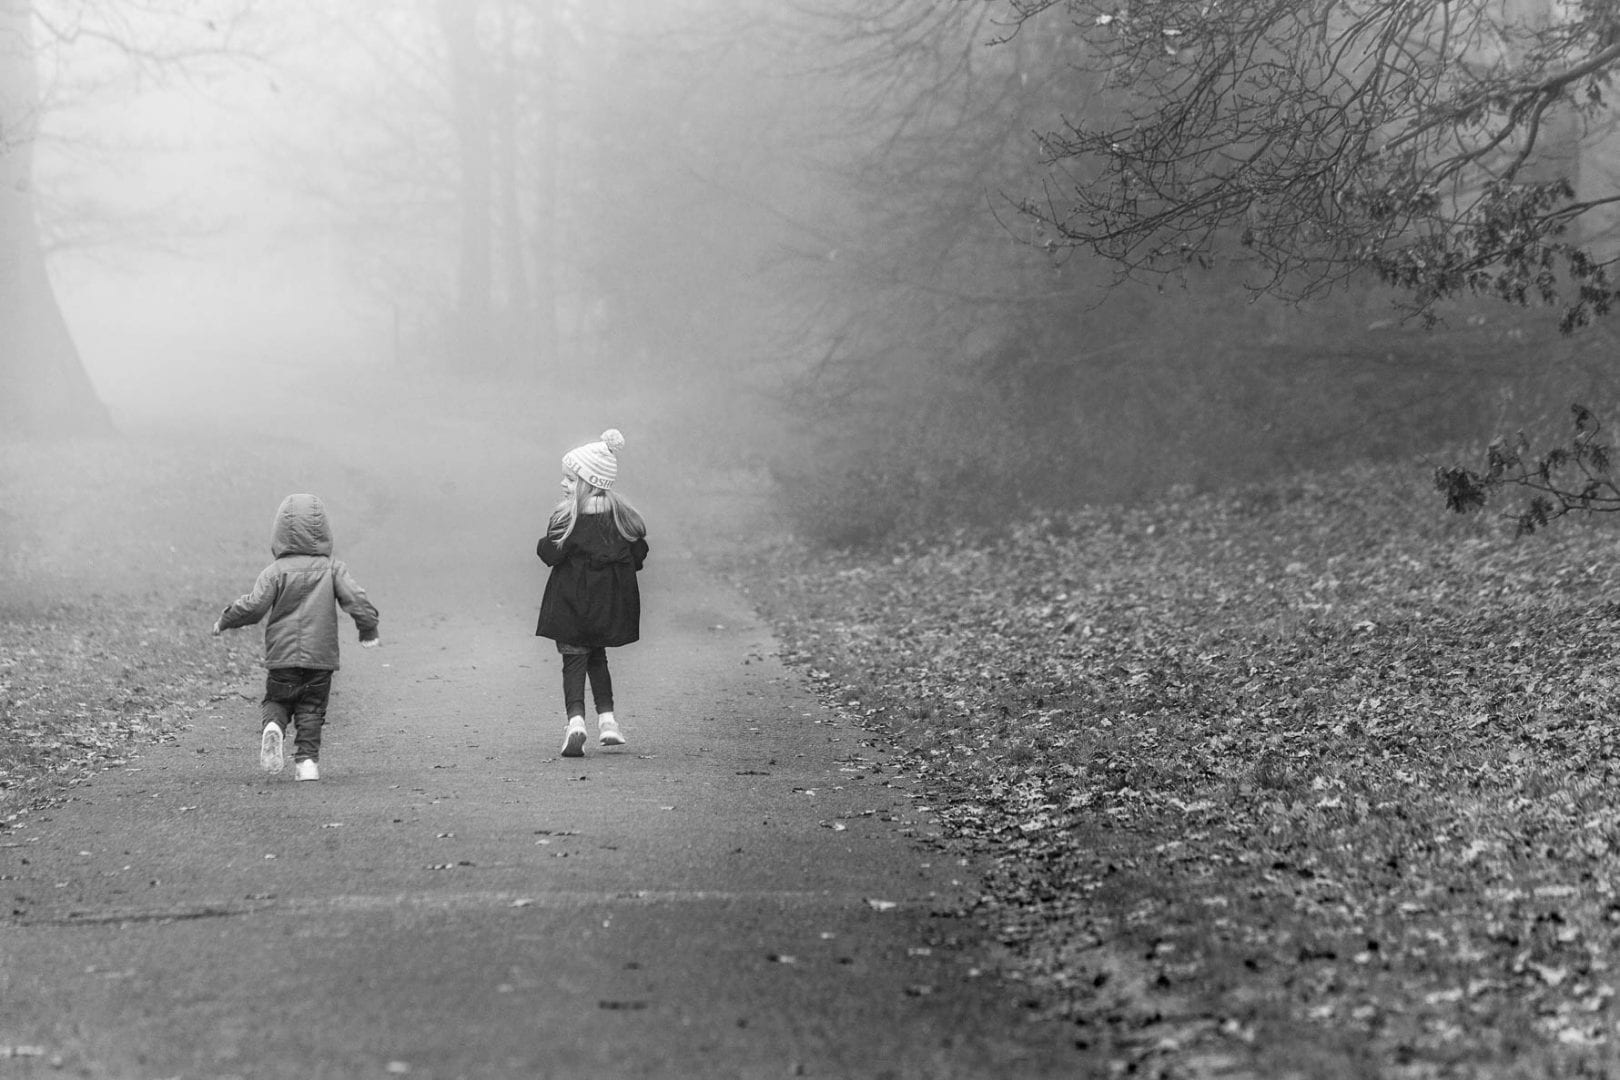 A young boy and girl run down the hill on a foggy day